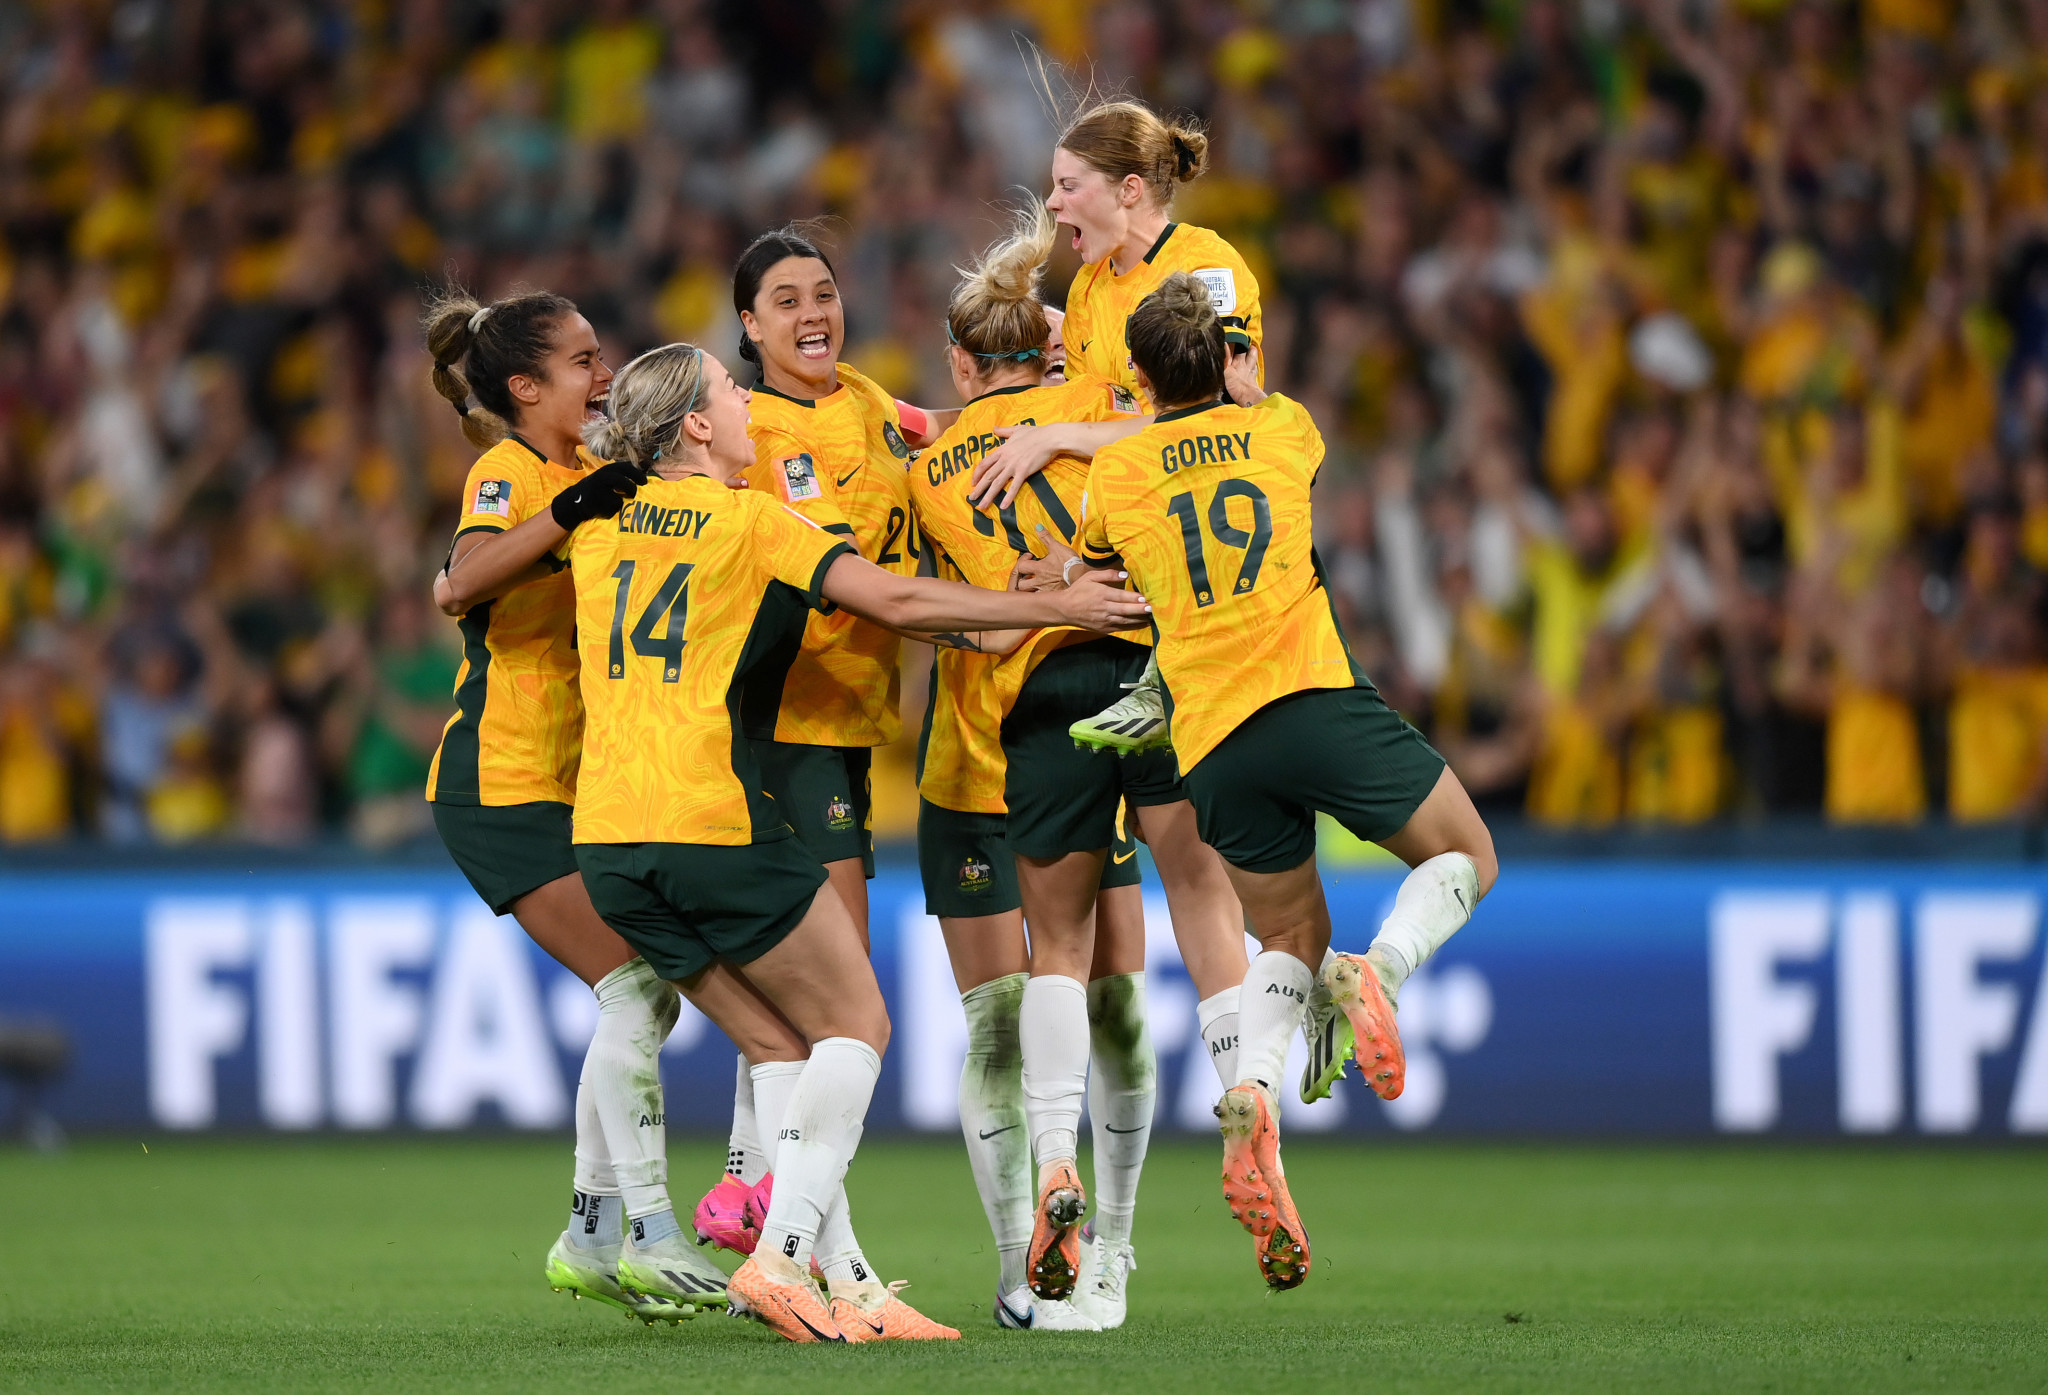 The Matildas ran out as 7-6 winners in the shoot-out following a 0-0 draw after 120 minutes in Lang Park in Brisbane ©Getty Images